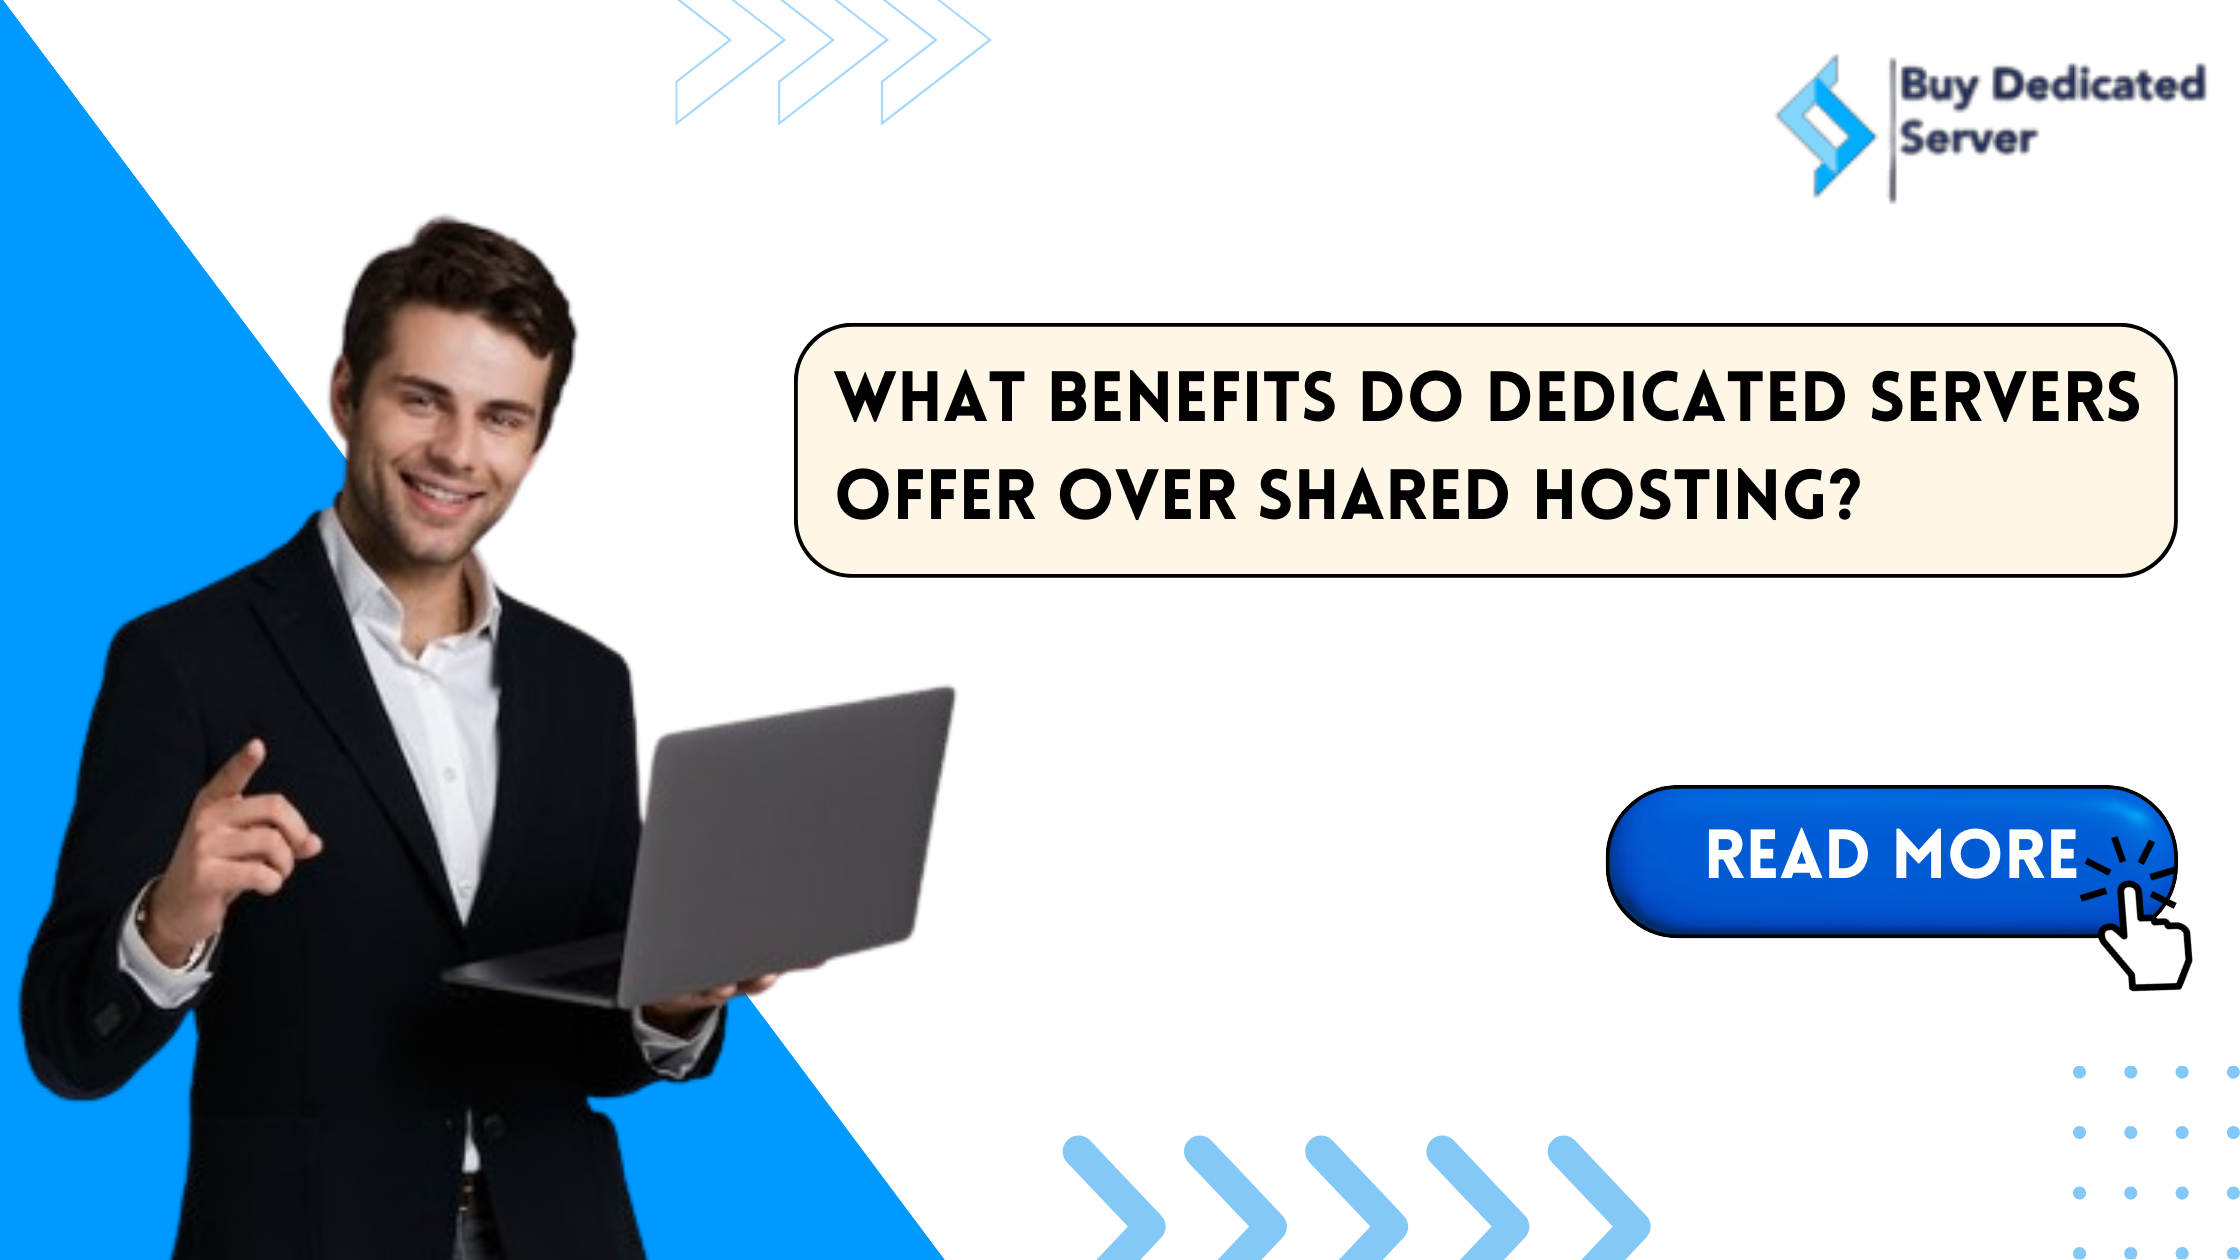 What Benefits Do Dedicated Servers Offer Over Shared Hosting?